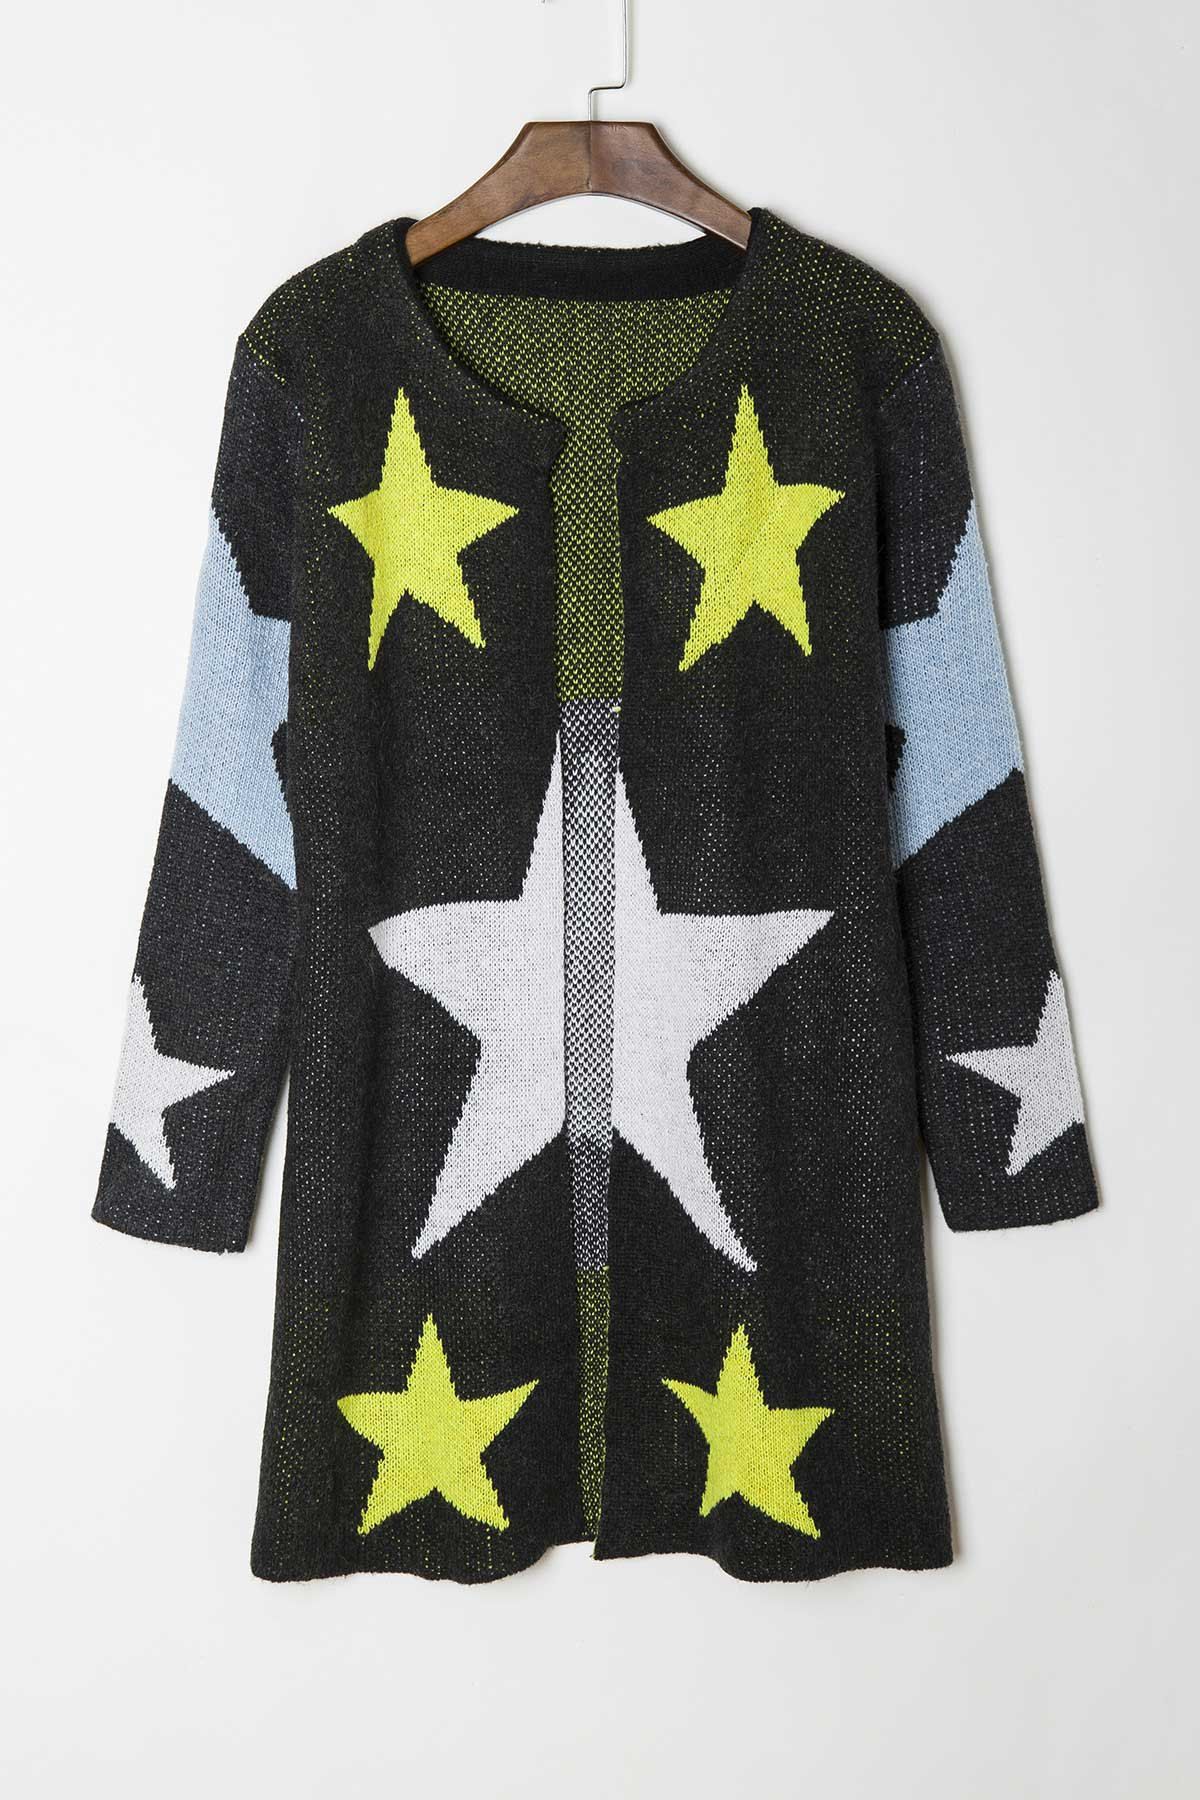 Fashionable Round Collar Star Pattern Long Sleeve Women's Cardigan - BLACK ONE SIZE(FIT SIZE XS TO M)